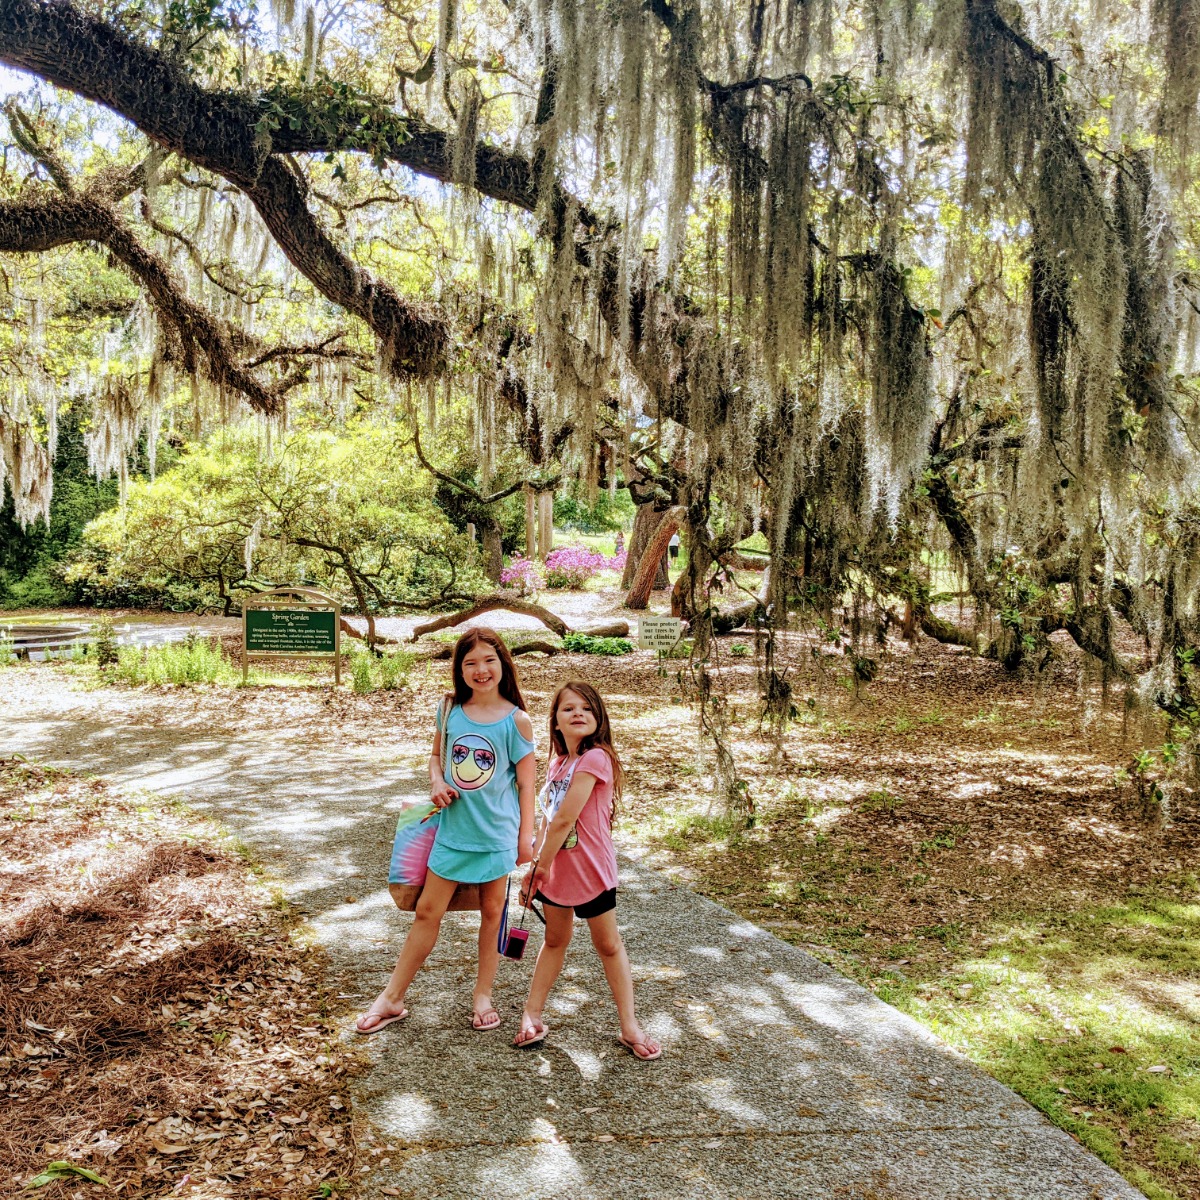 Check out these mossy trees at Airlie Gardens!